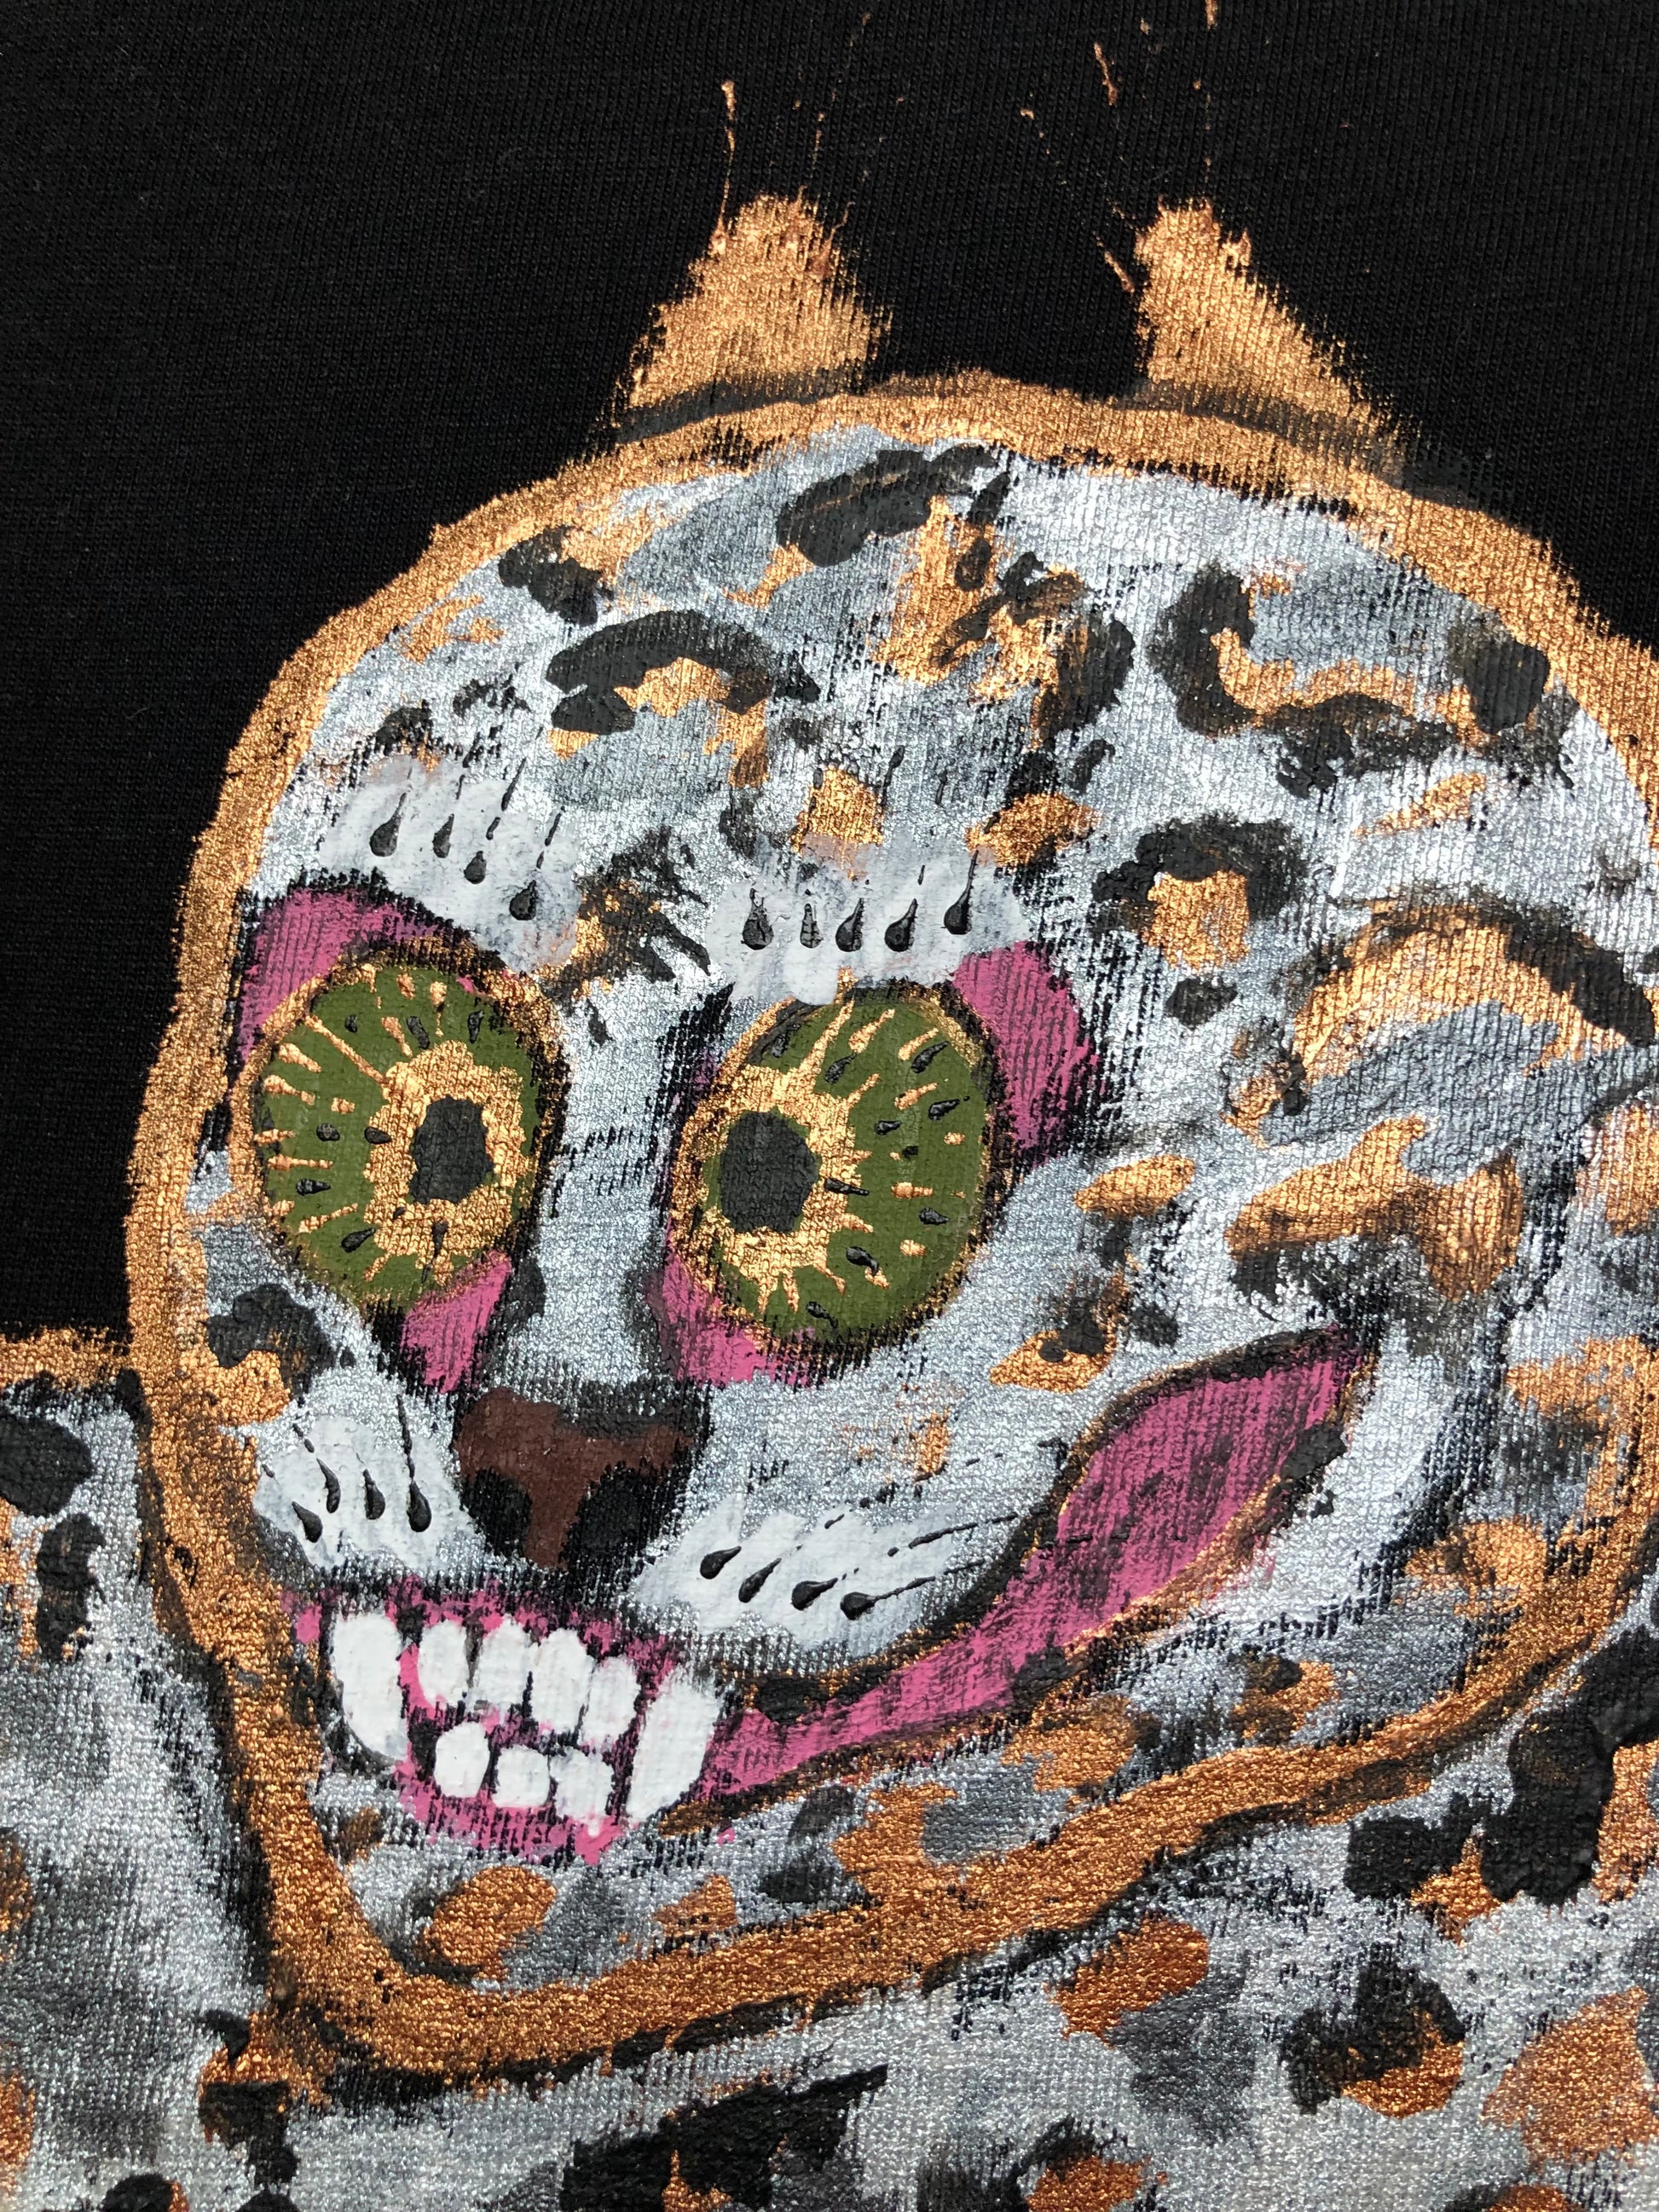 Very detailed muzzle of a leopard with mustaches, fangs and olive eyes on the surface of a black t-shirt